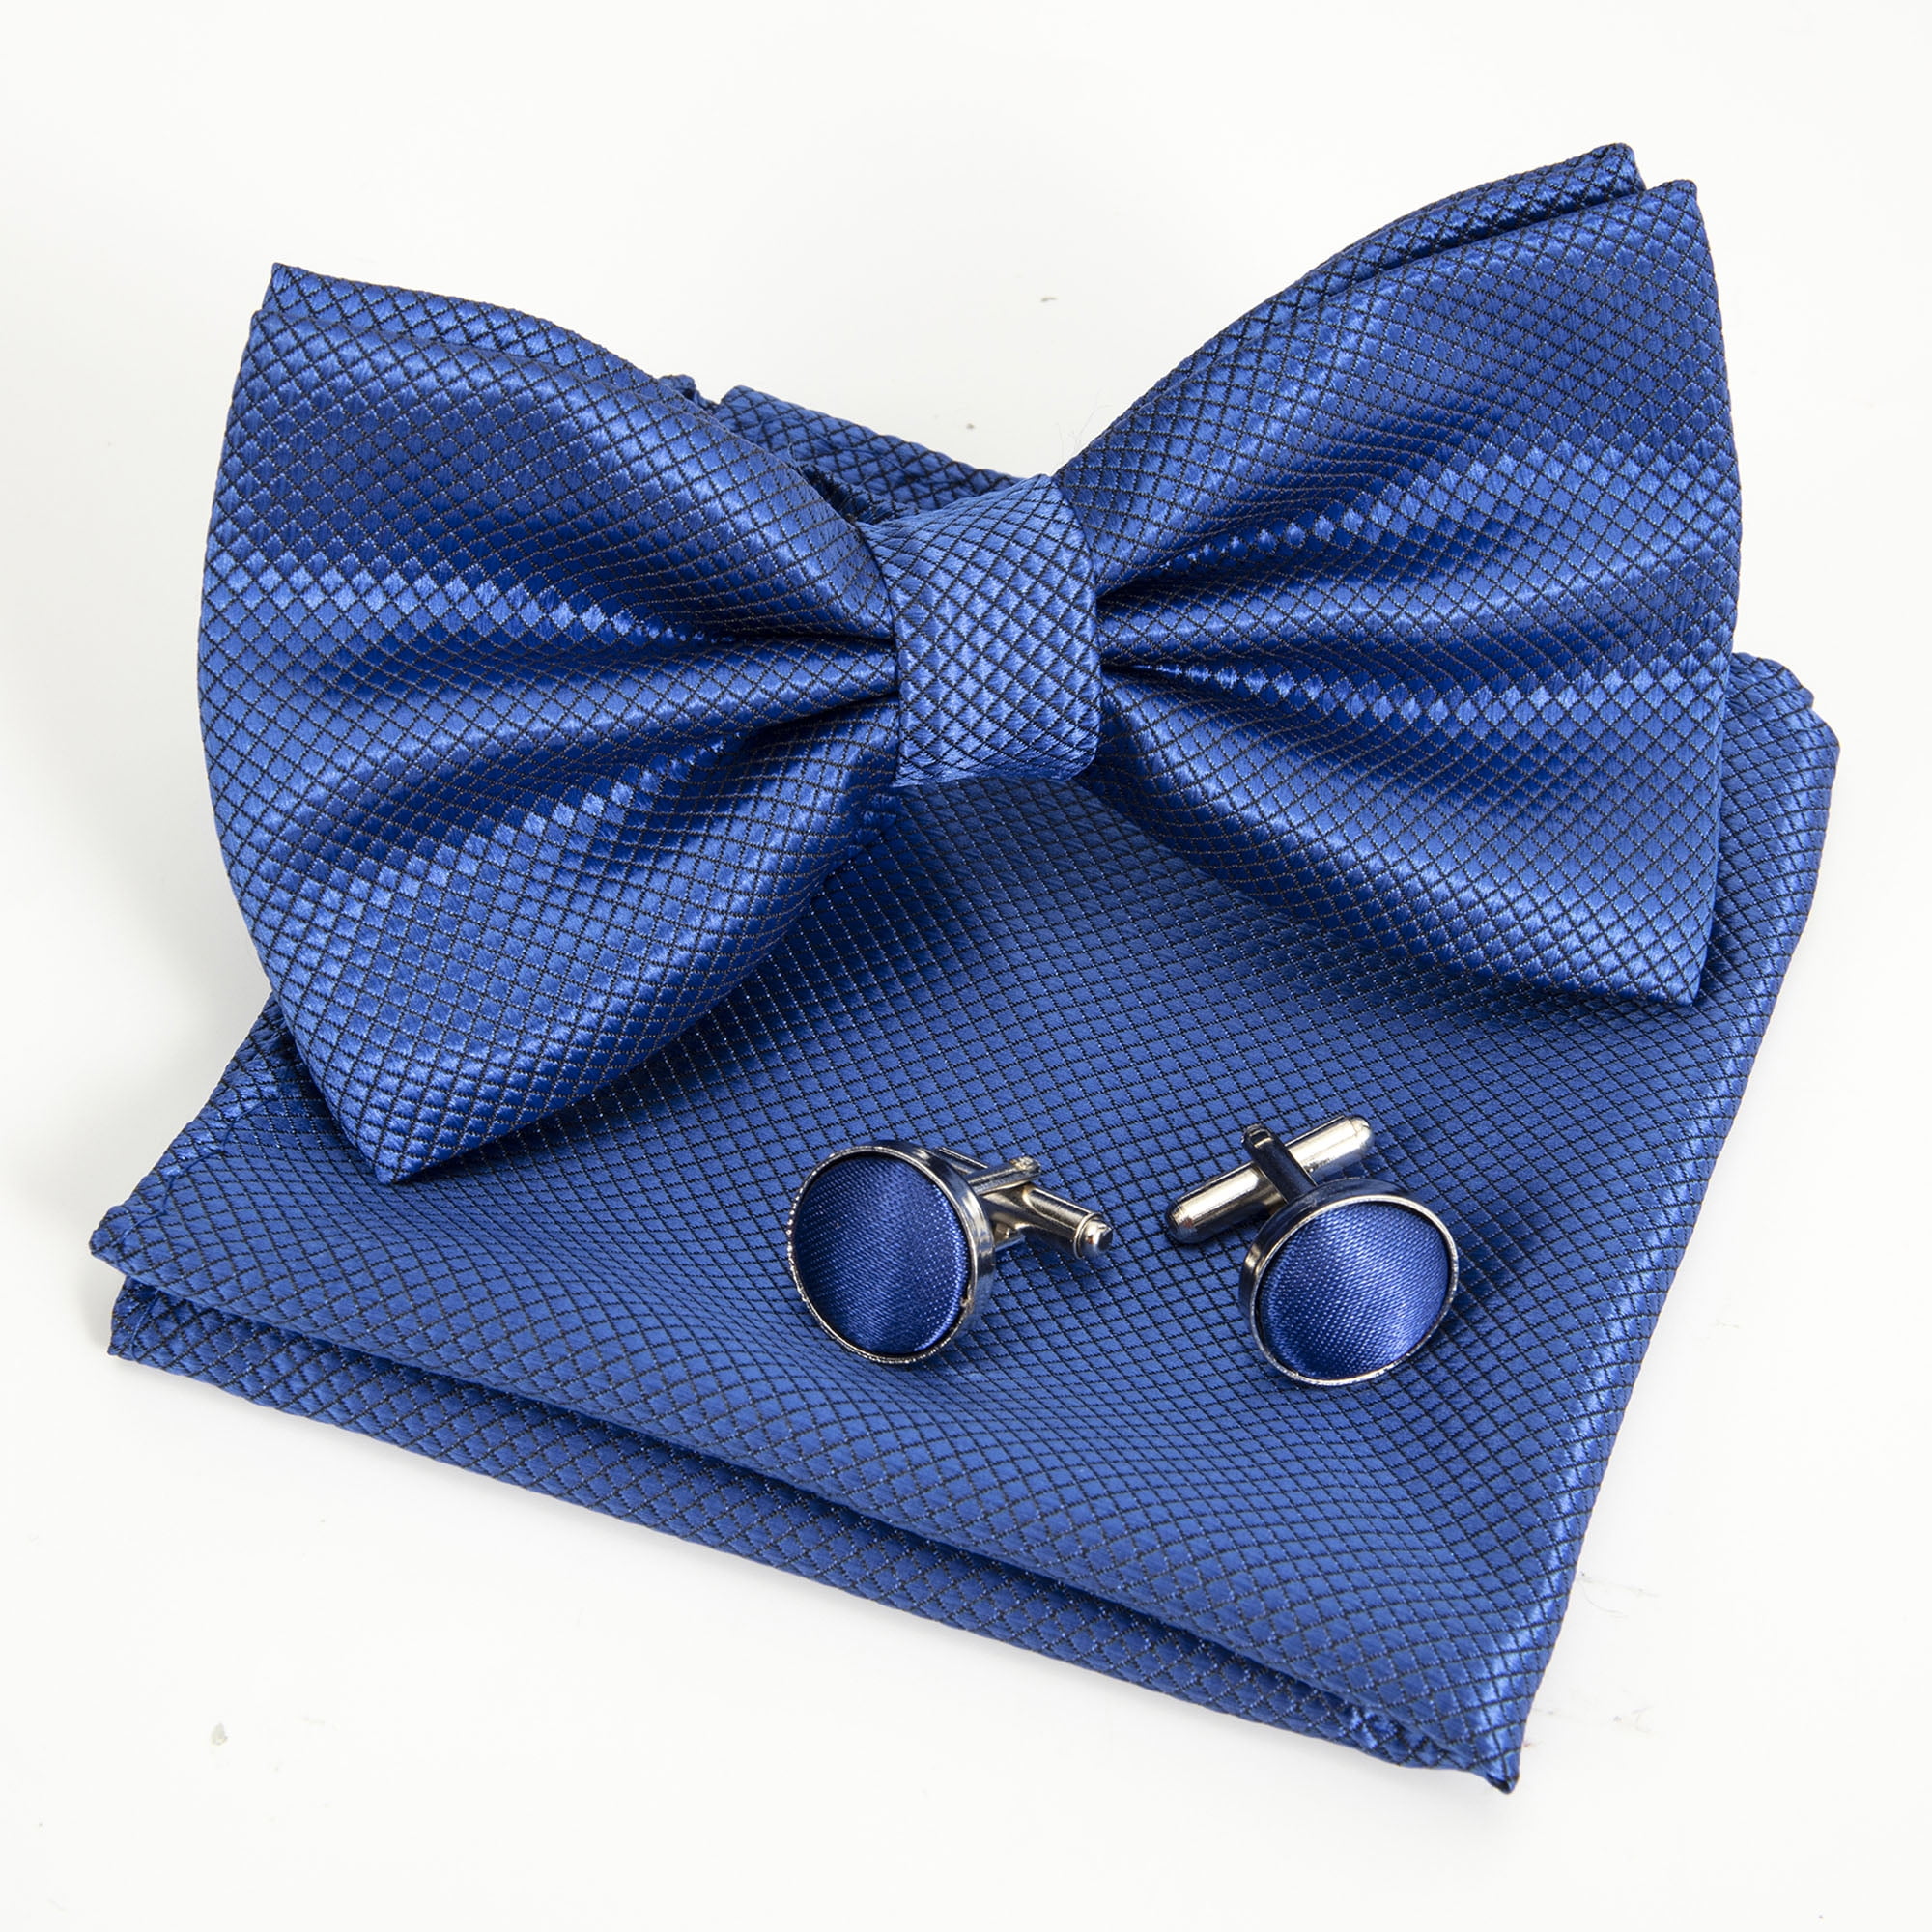 BLACK RED DESIGNS WITH CUFFLINKS GREY FANTASTIC CHOICE OF BOXED TIE SETS BLUE